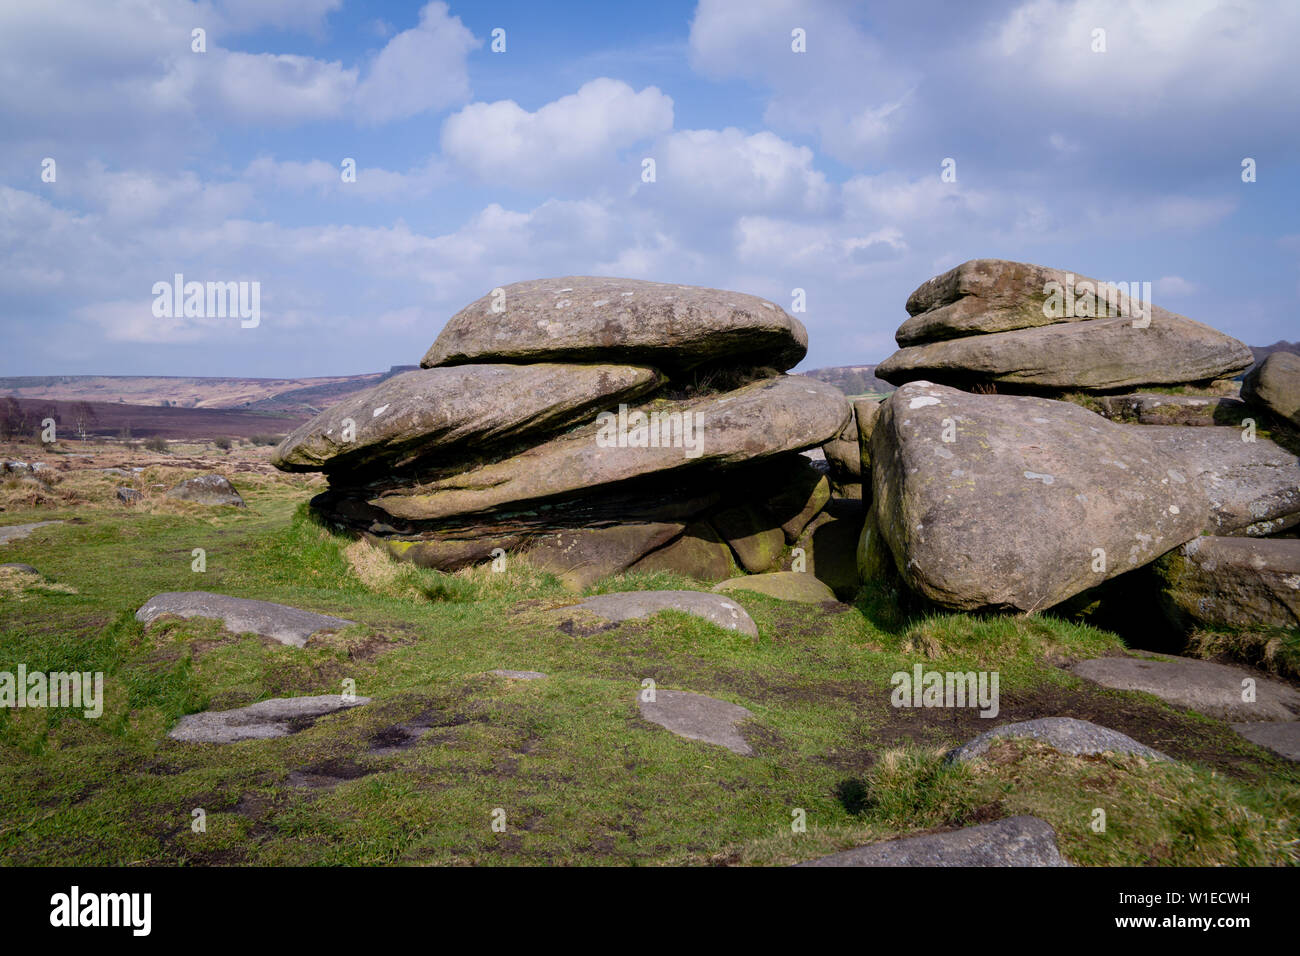 A pile of millstone grit rocks or boulders at Over Owler Tor in the Peak District, overlooking moorland Stock Photo